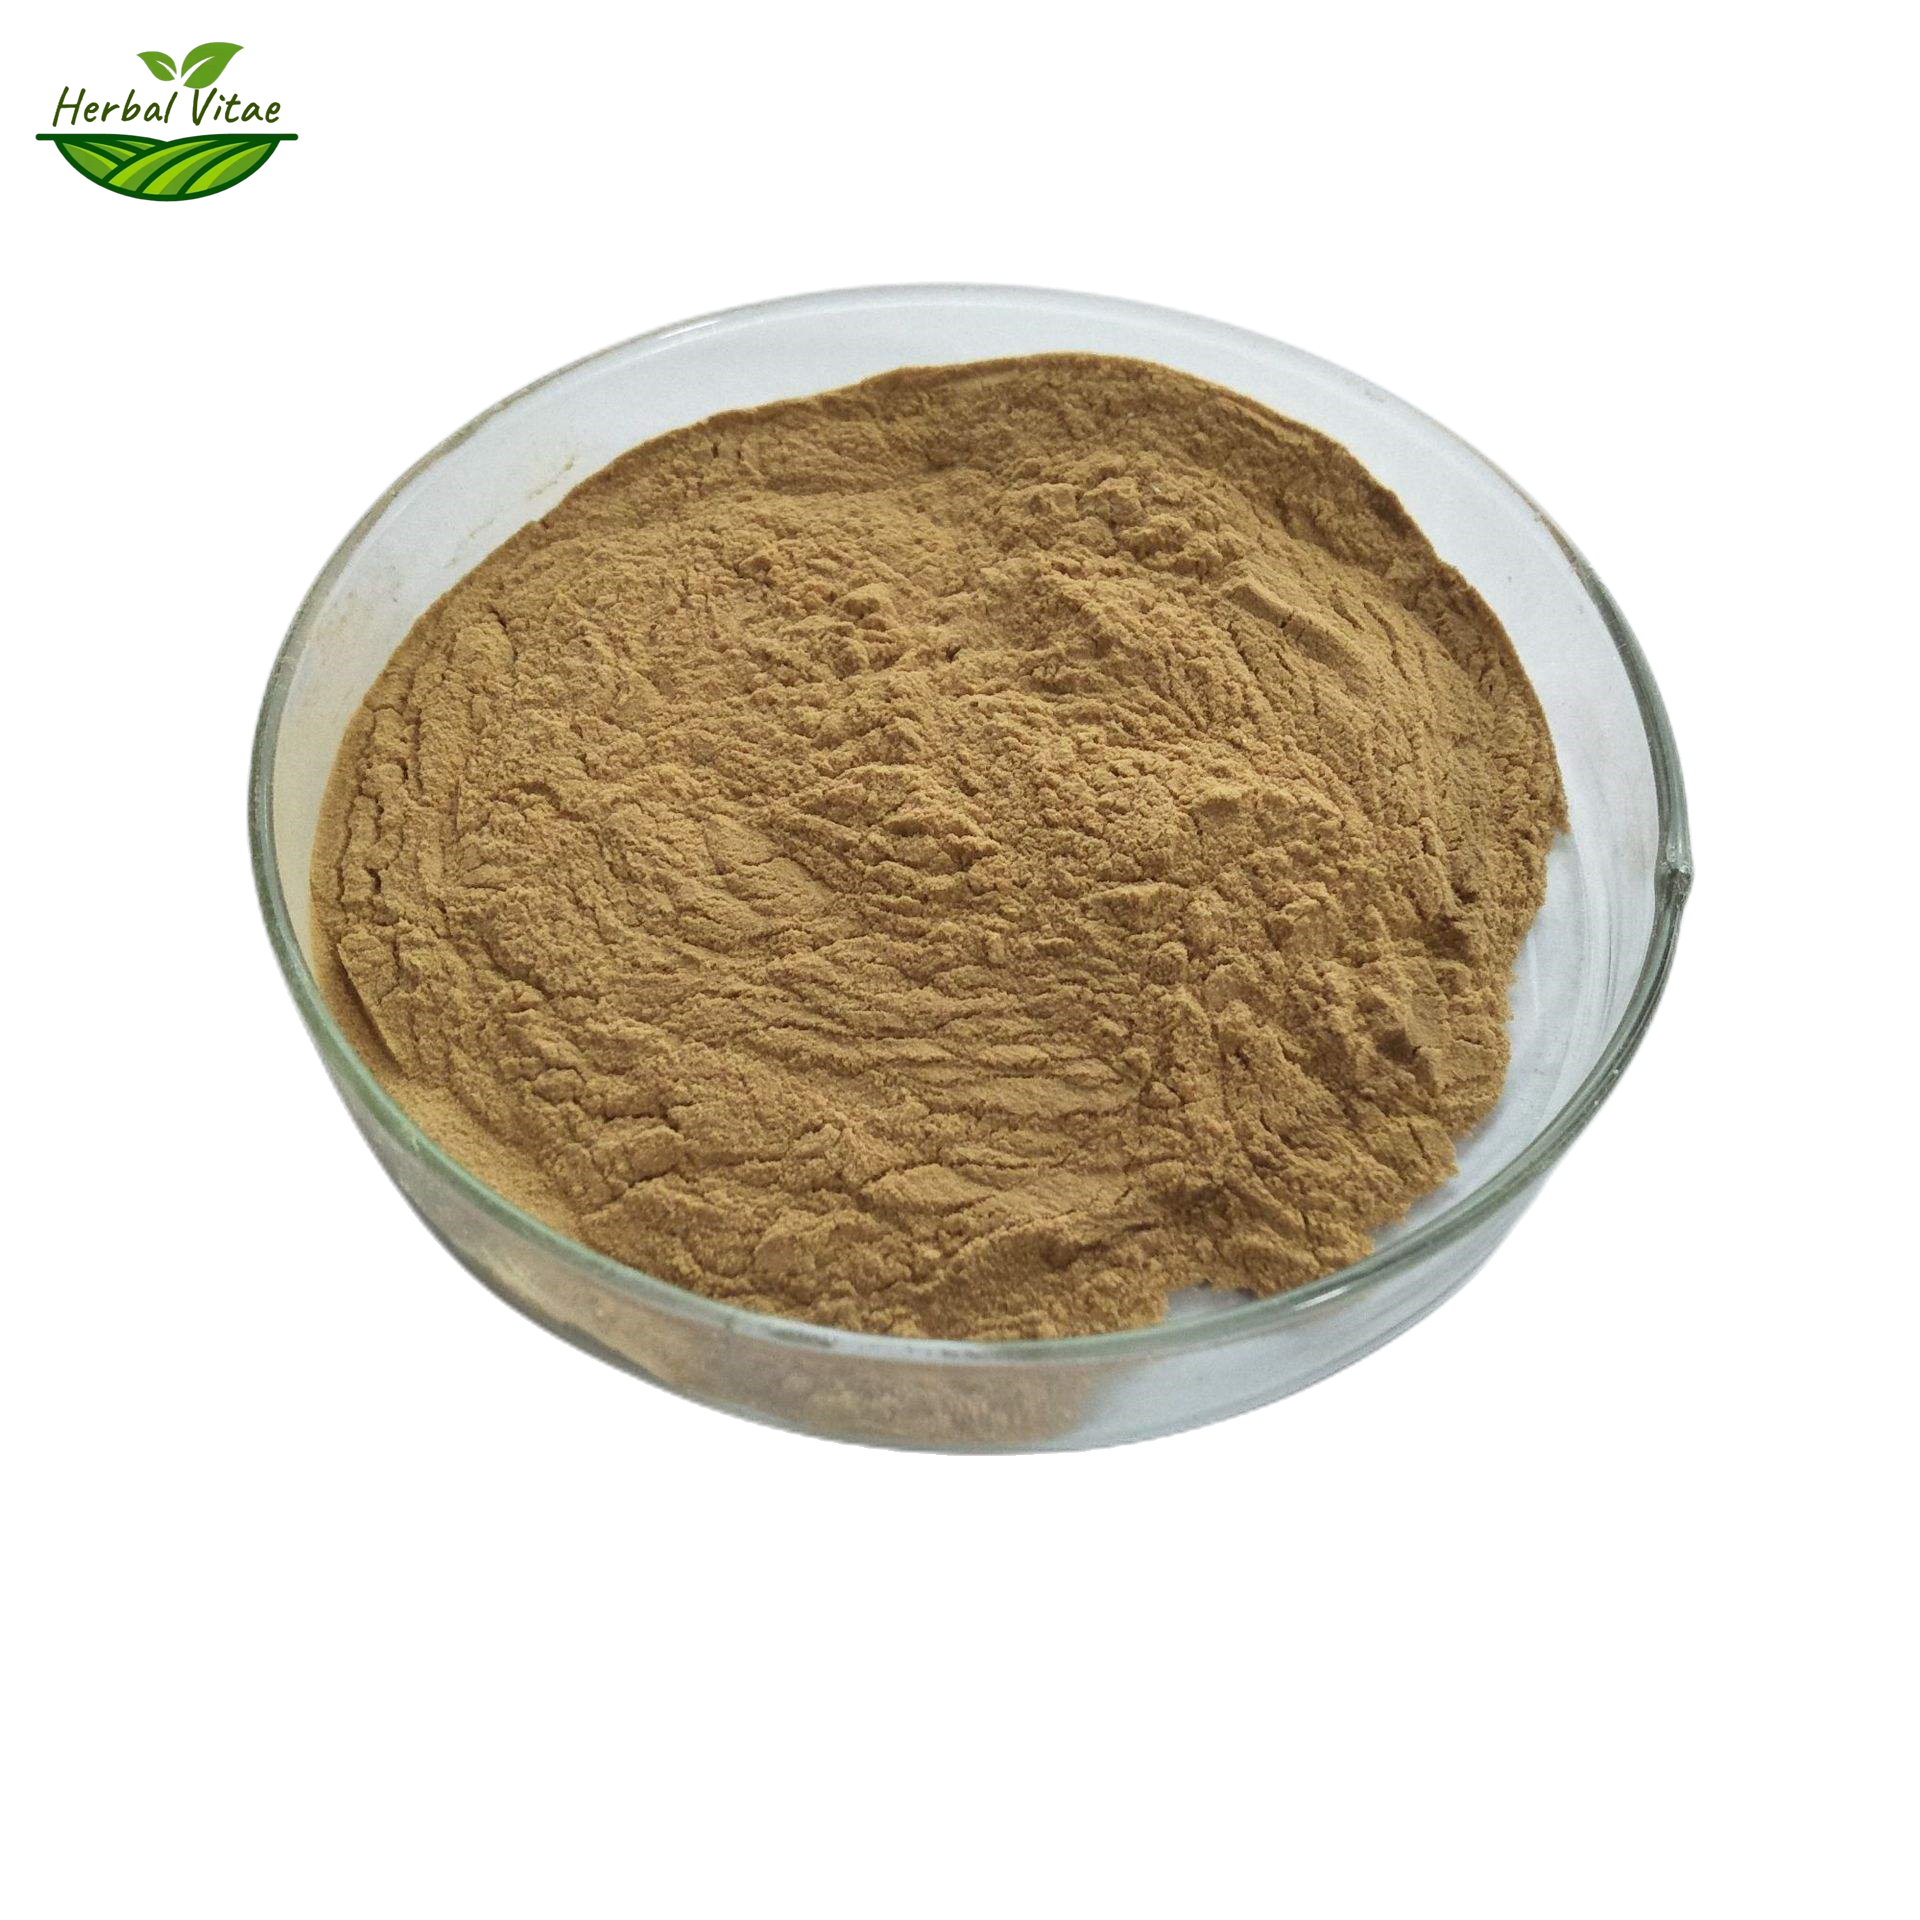 Cleavers Herb Extract Powder